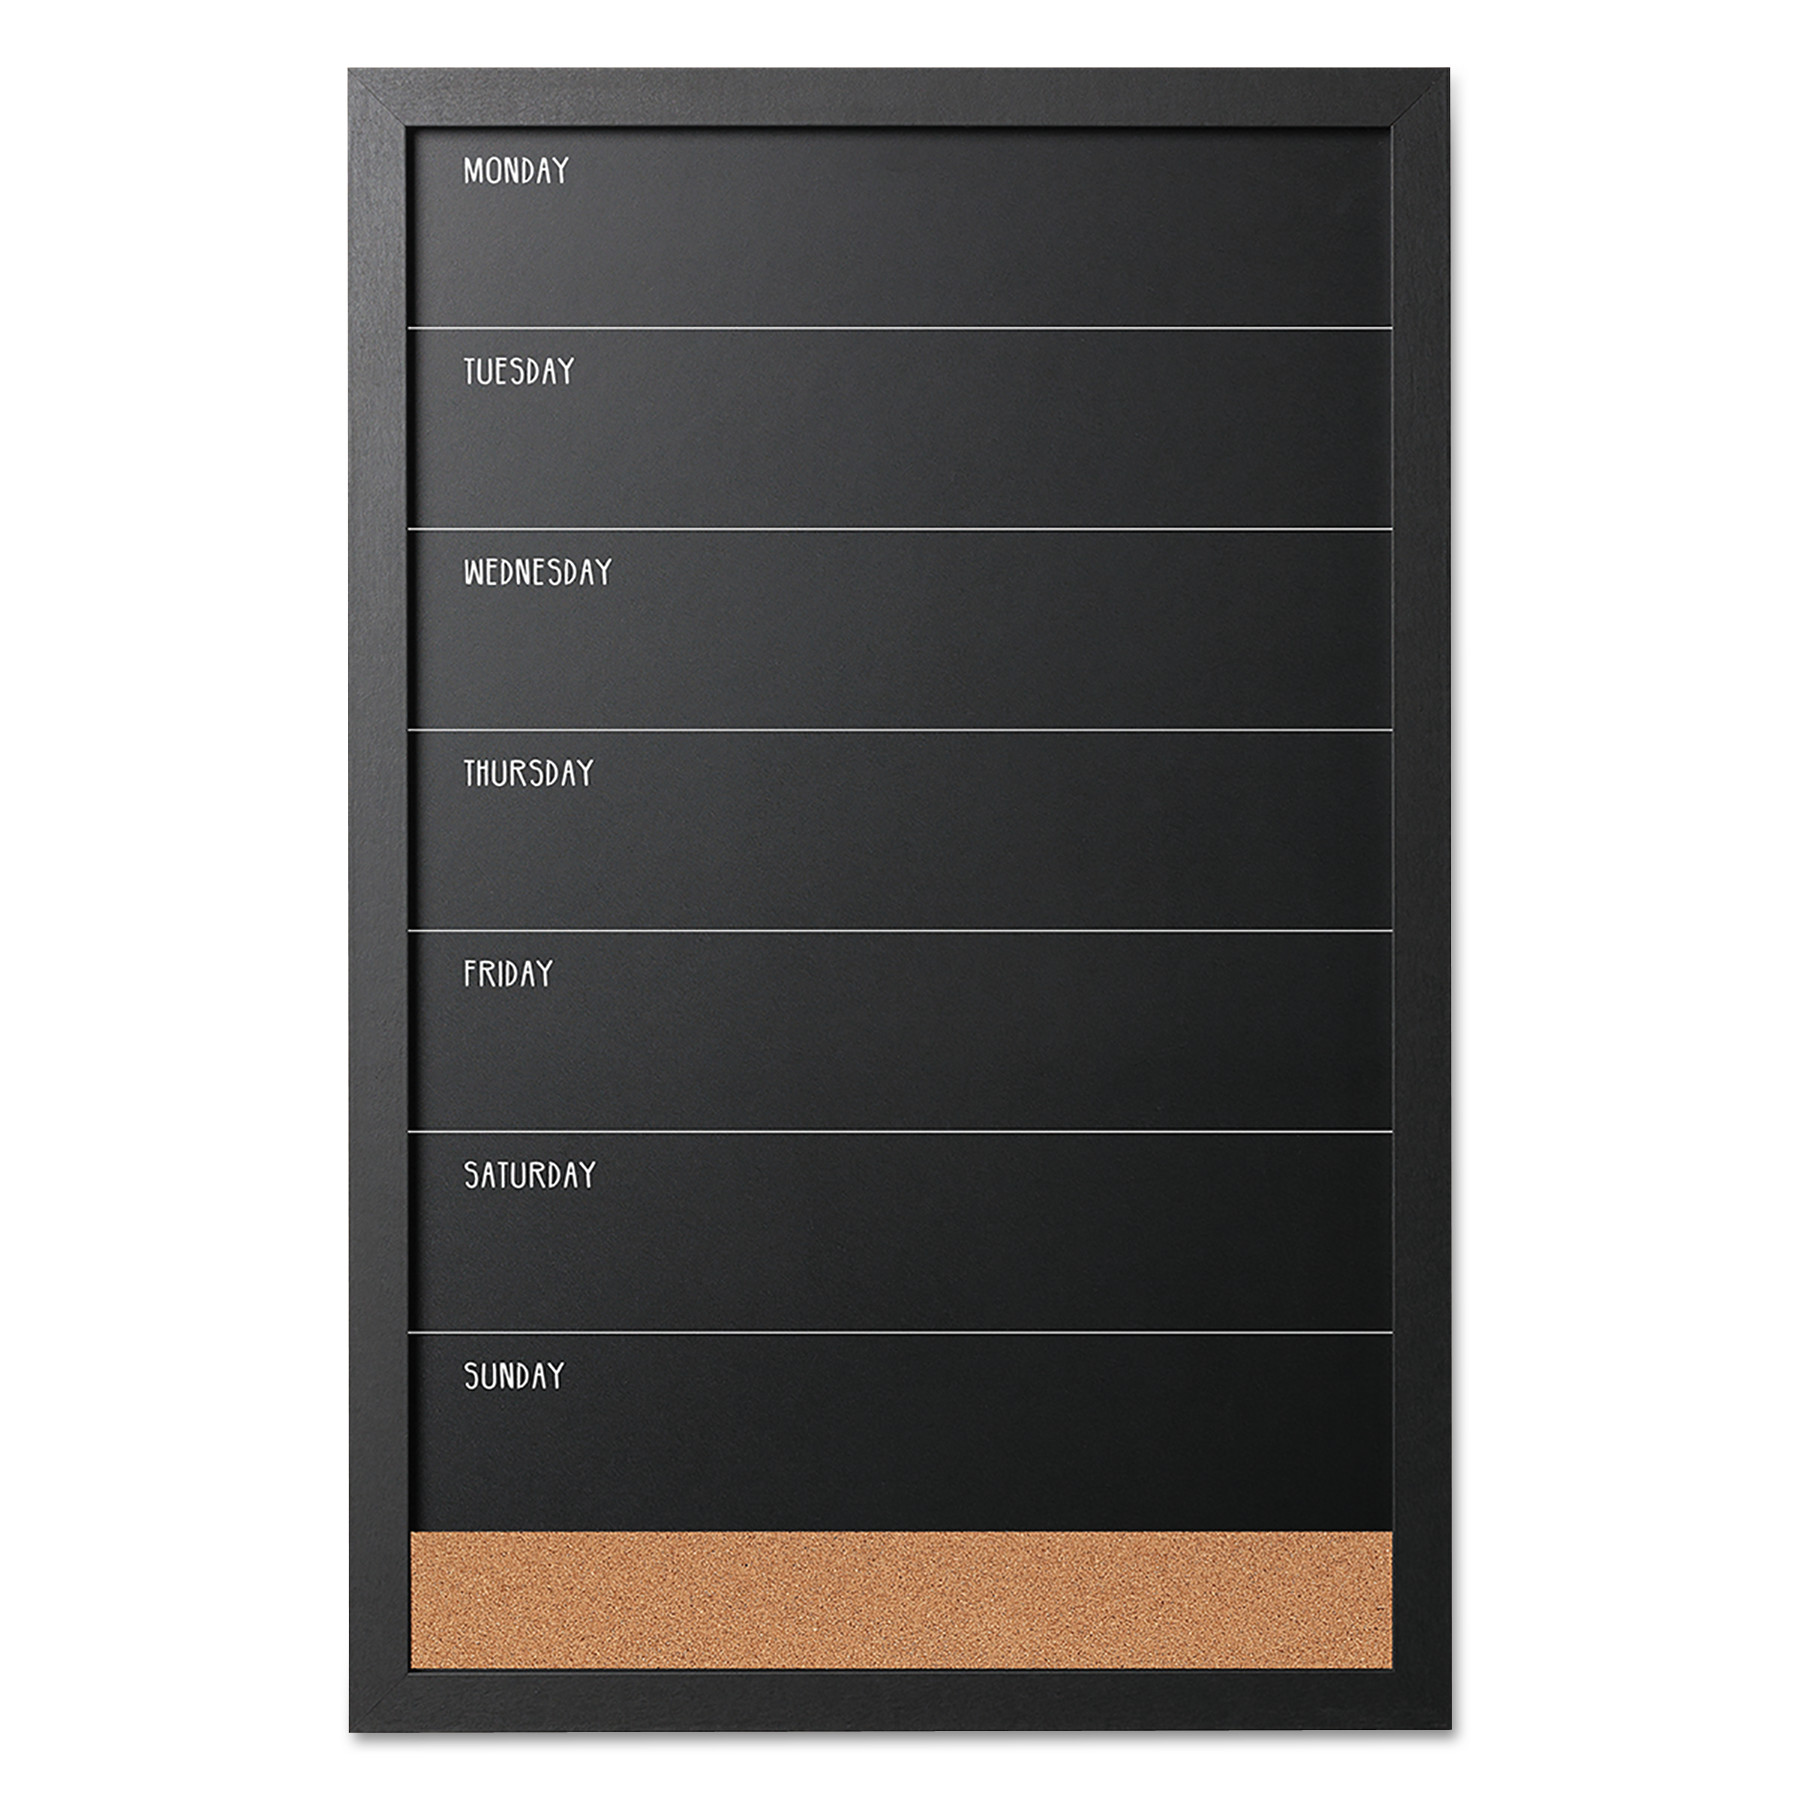  MasterVision PM0329168 Chalk Weekly Planner, 23.62 x 15.75, Black, MDF Frame (BVCPM0329168) 